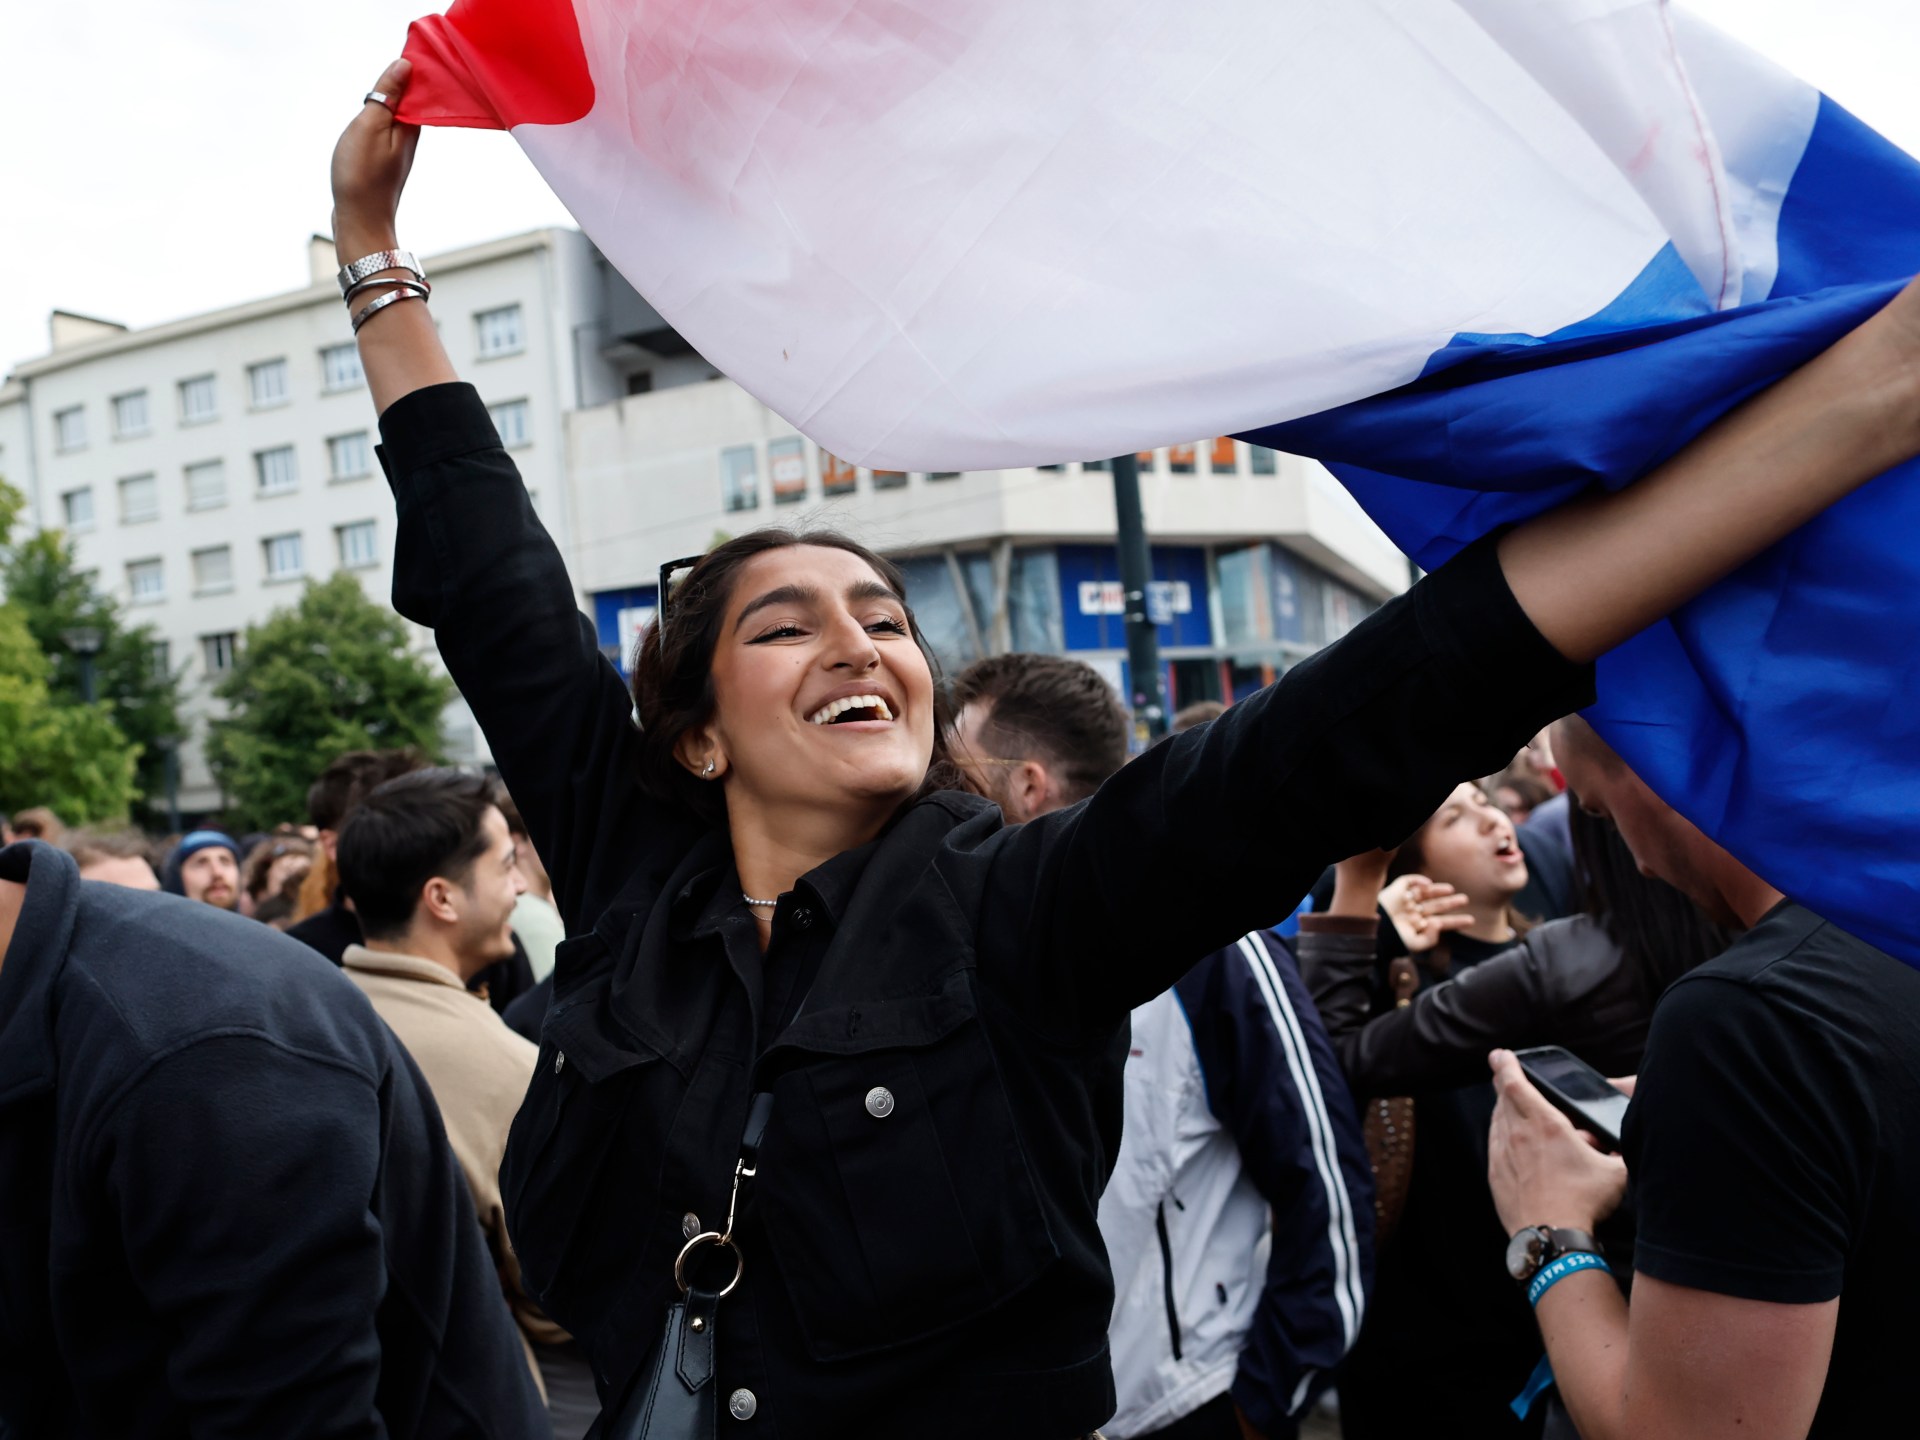 French election results: No party secured a majority, so what’s next? | Elections News